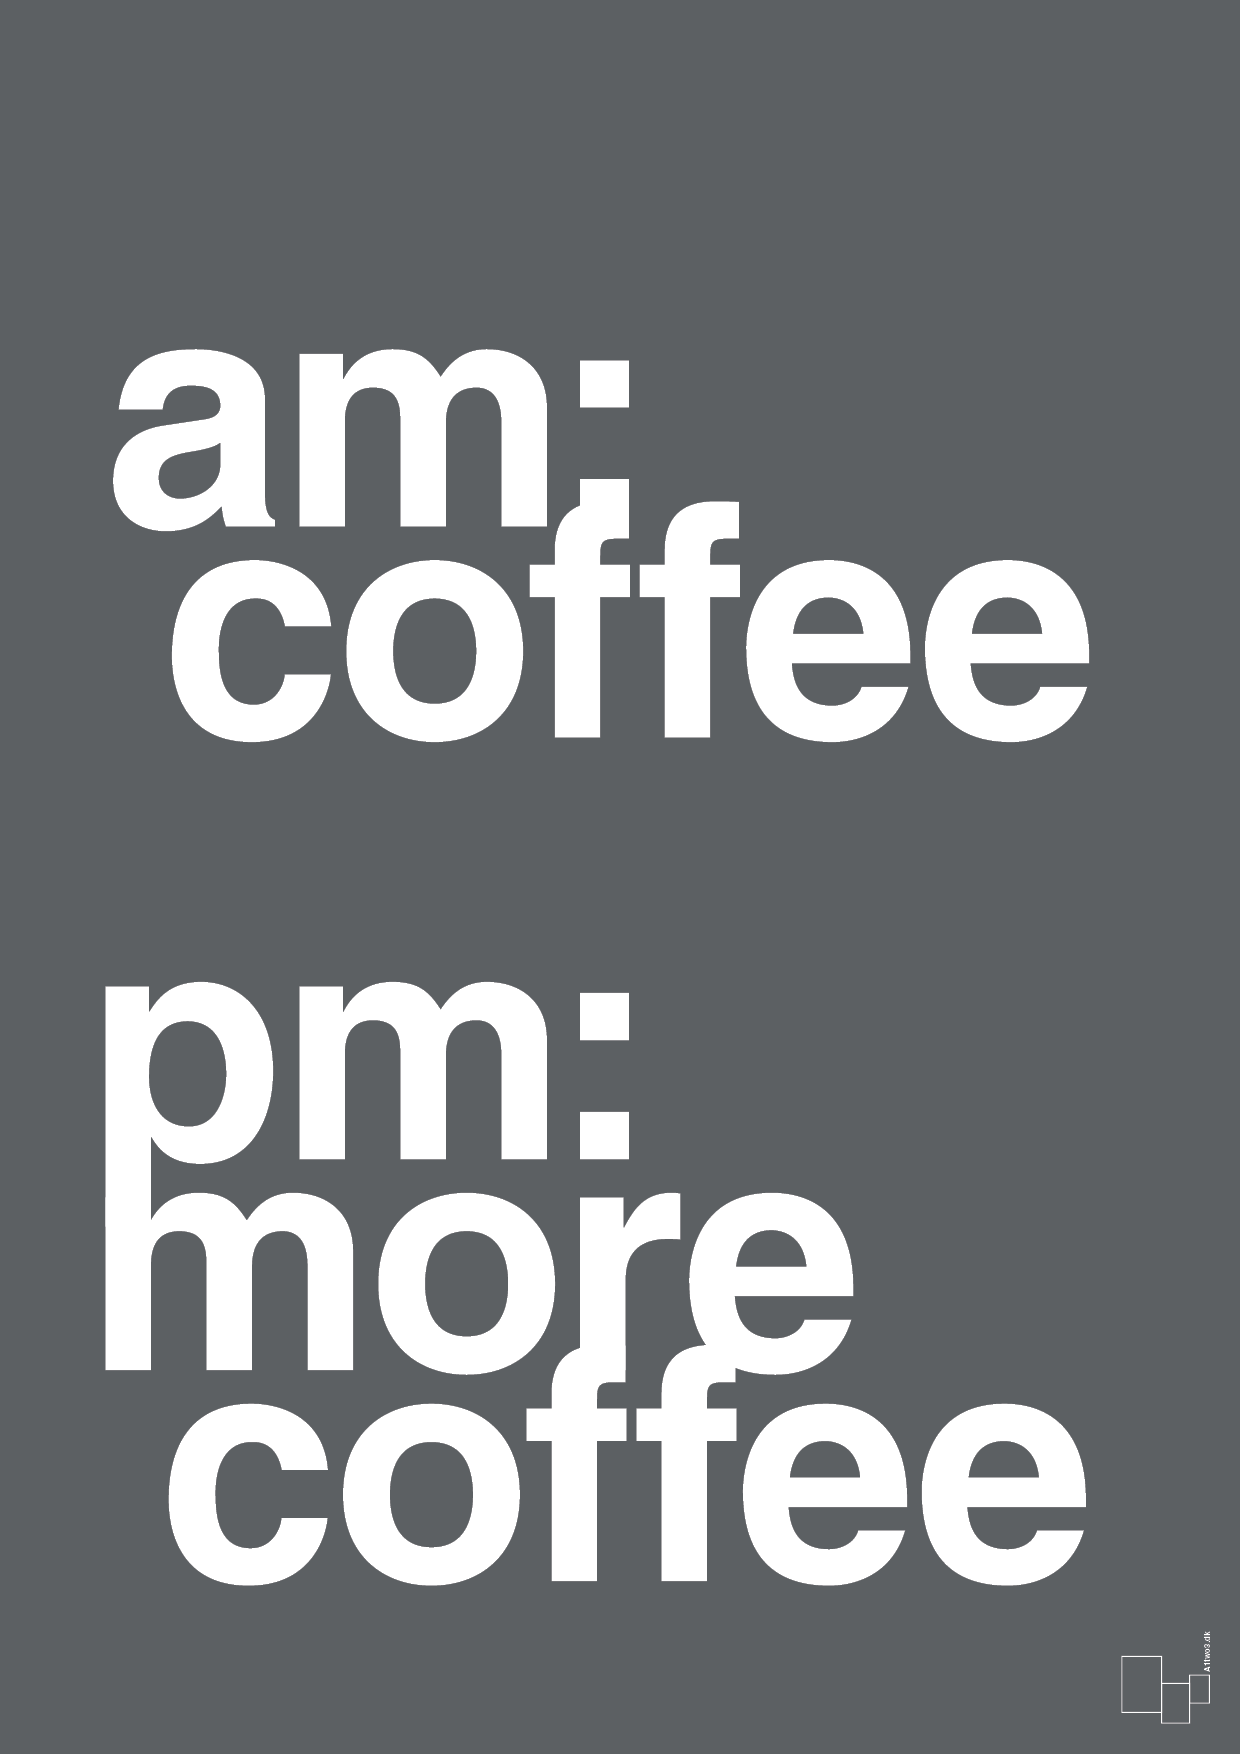 am coffee pm more coffee - Plakat med Ordsprog i Graphic Charcoal